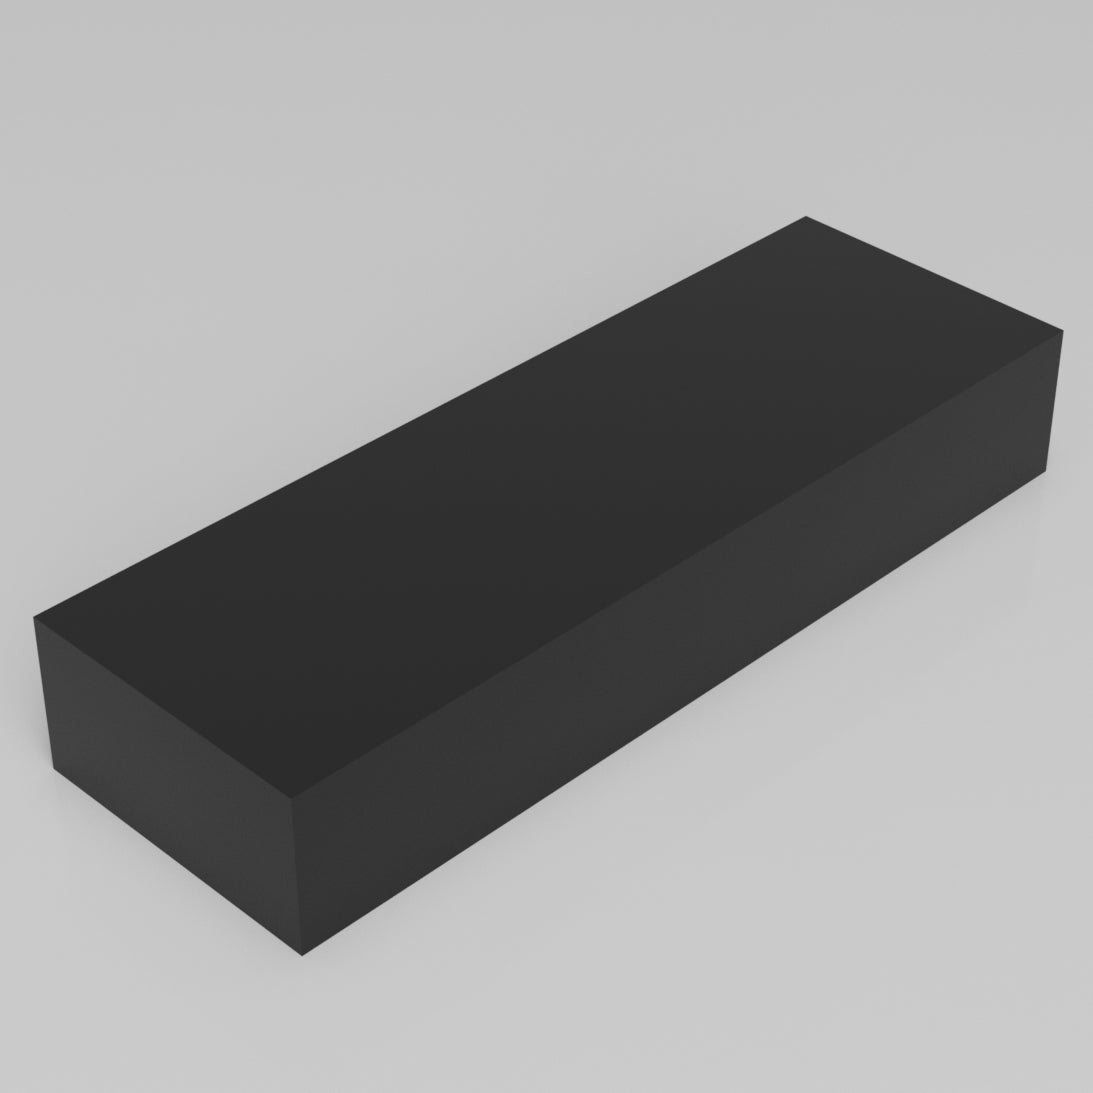 Machinable Wax Rectangular Block Front View 2 Inch by 4 Inch by 12 Inch